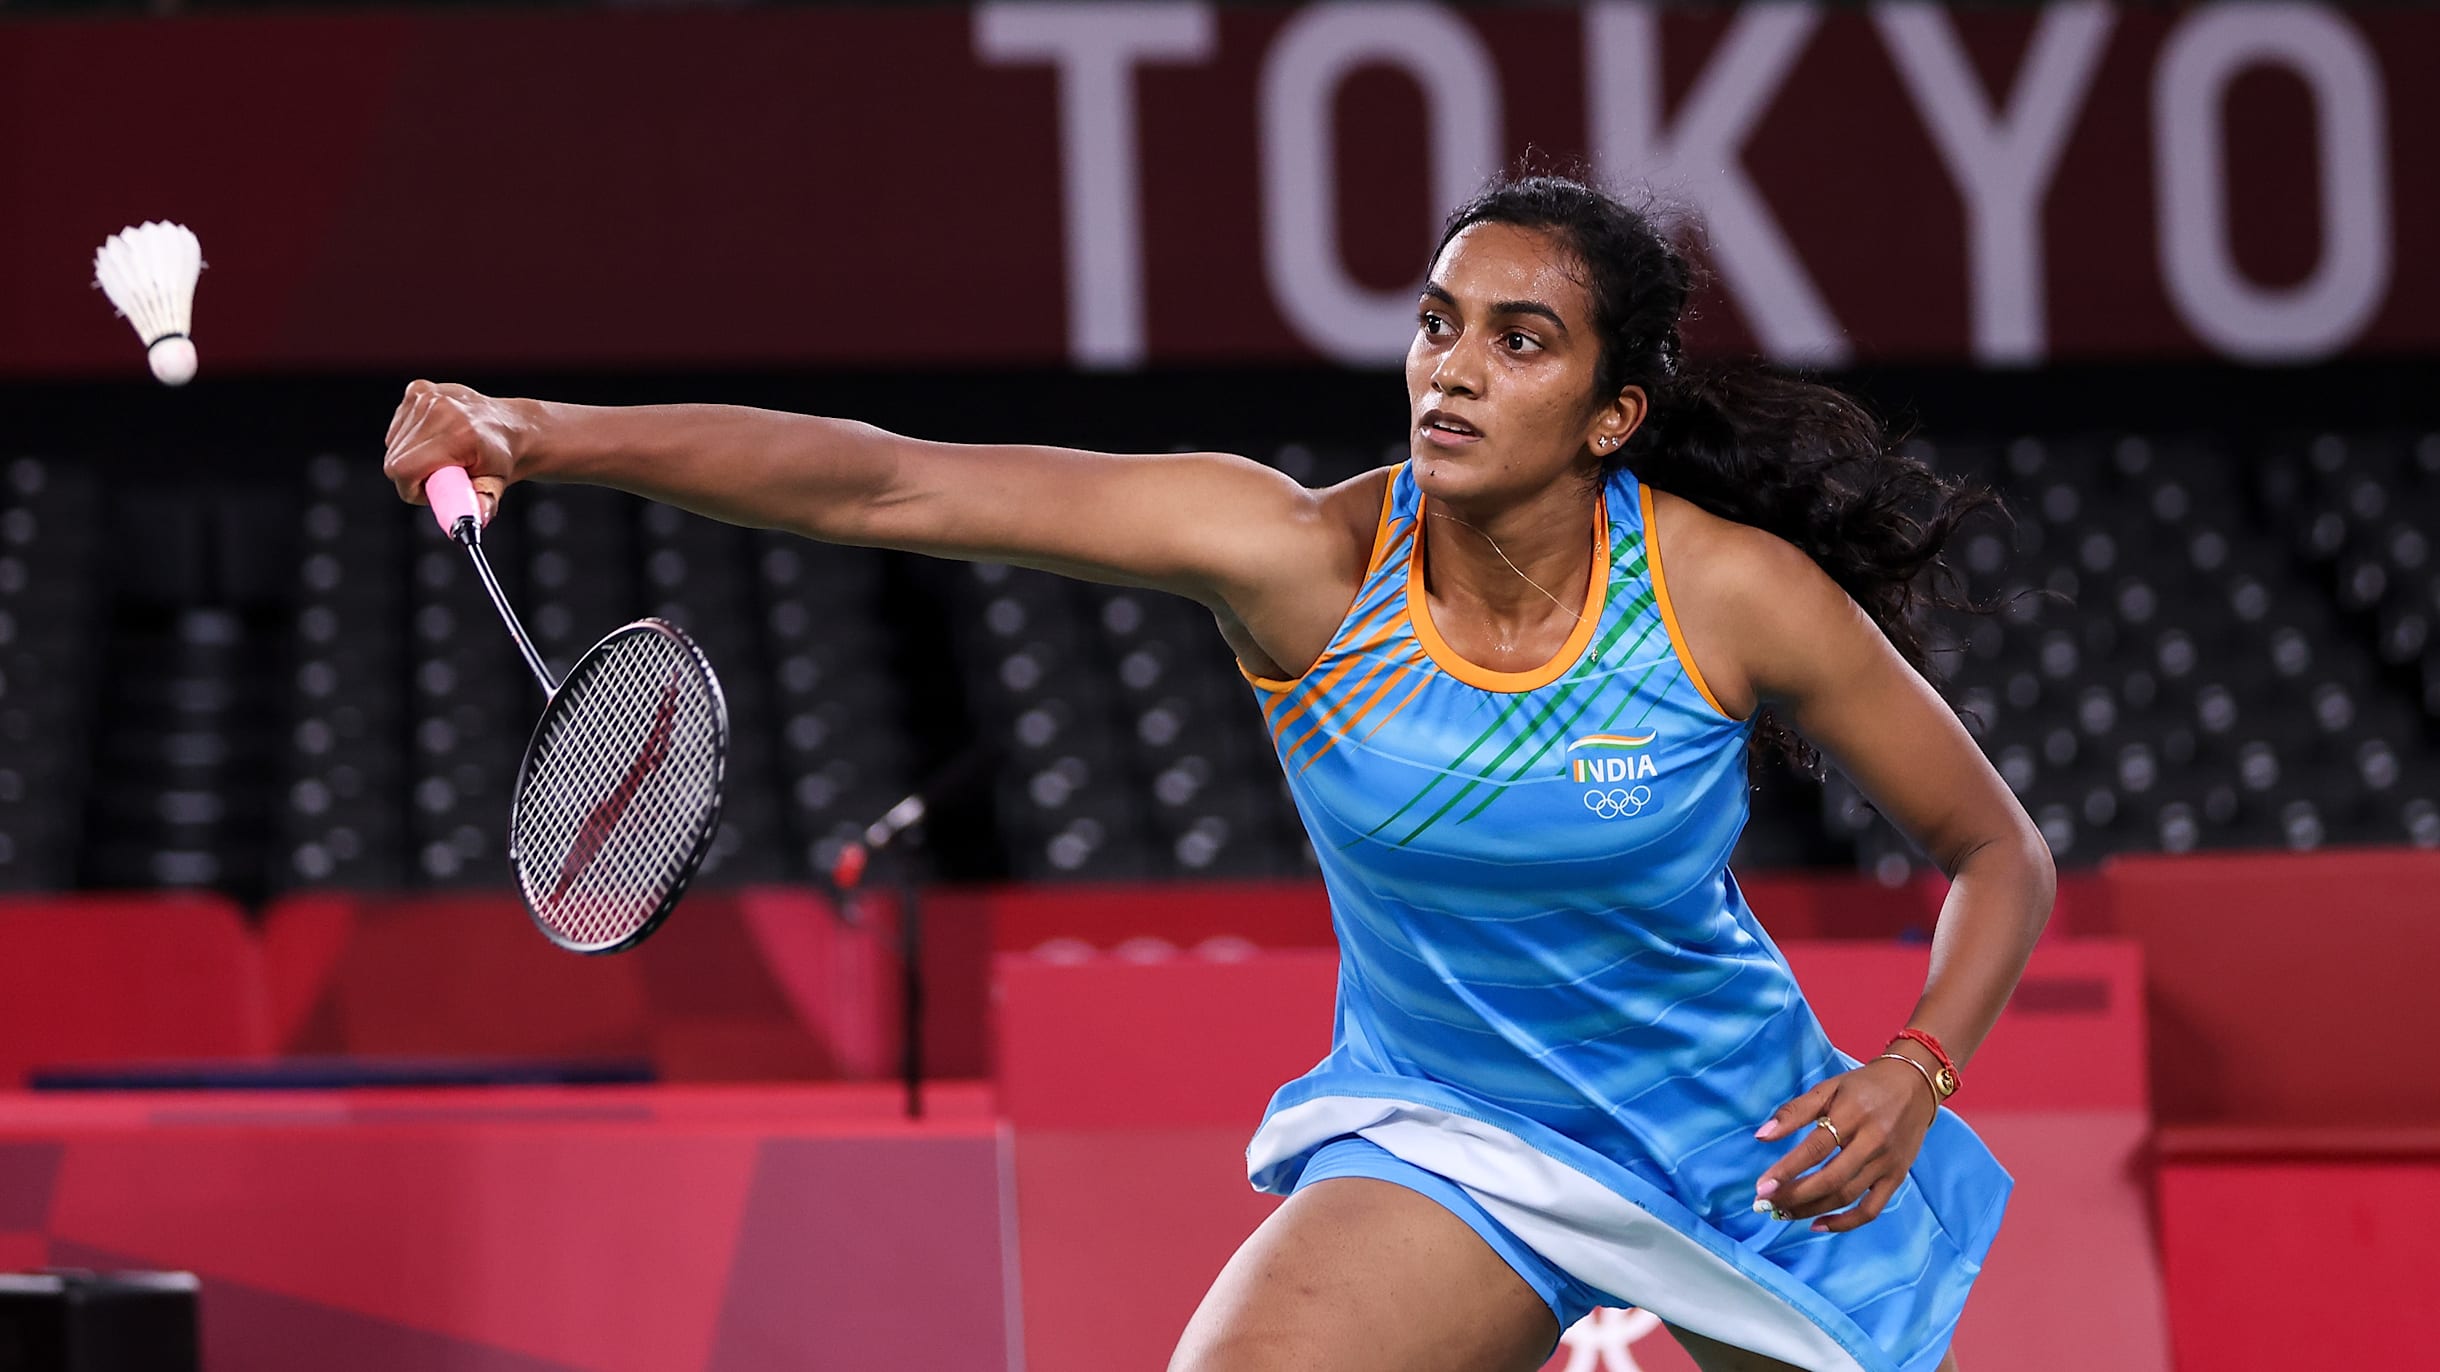 BWF World Tour Finals 2021 PV Sindhu to play, watch live streaming and telecast in India